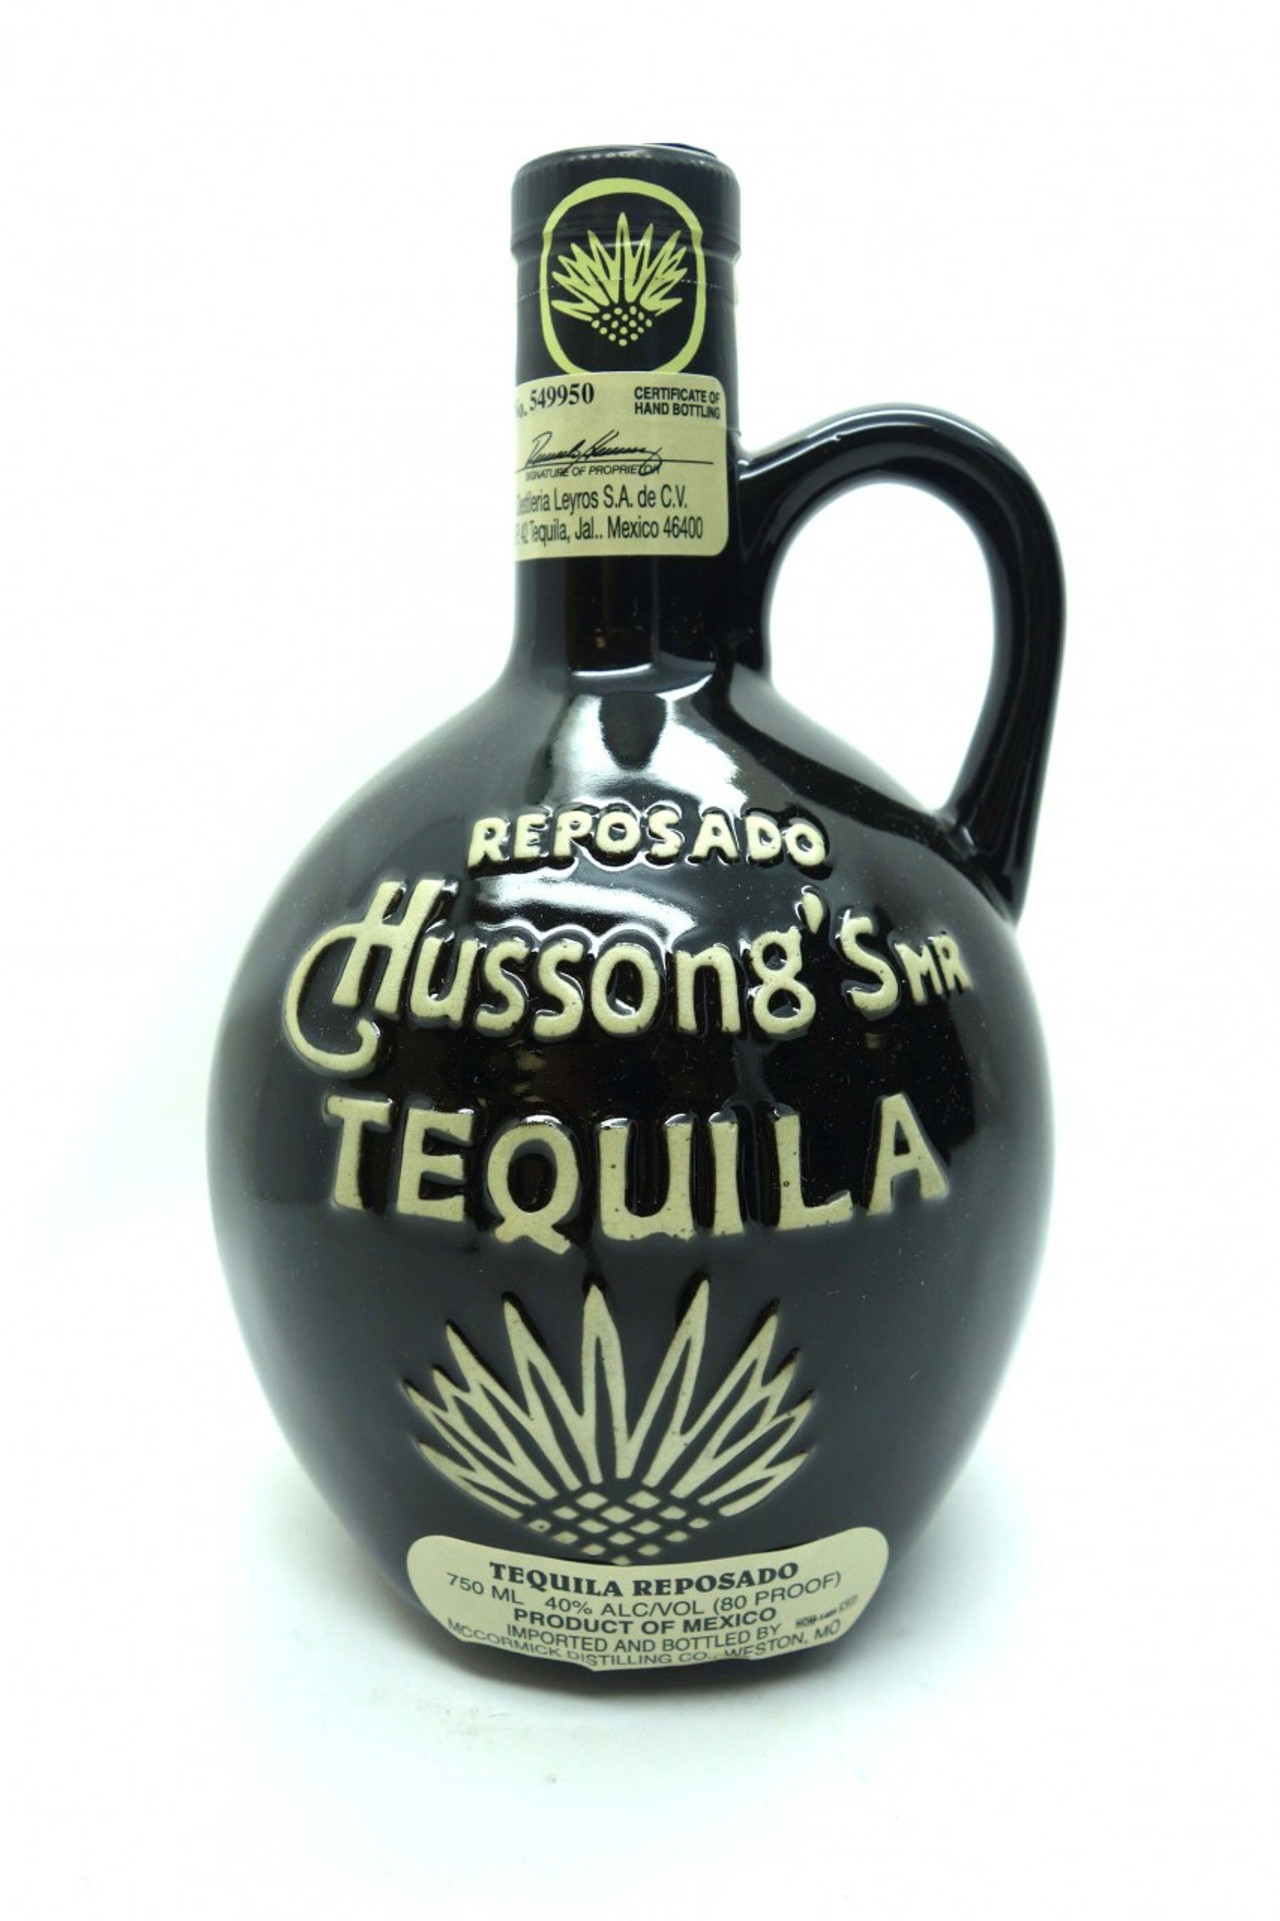 Hussong's MR tequila Reposado Old Town Tequila